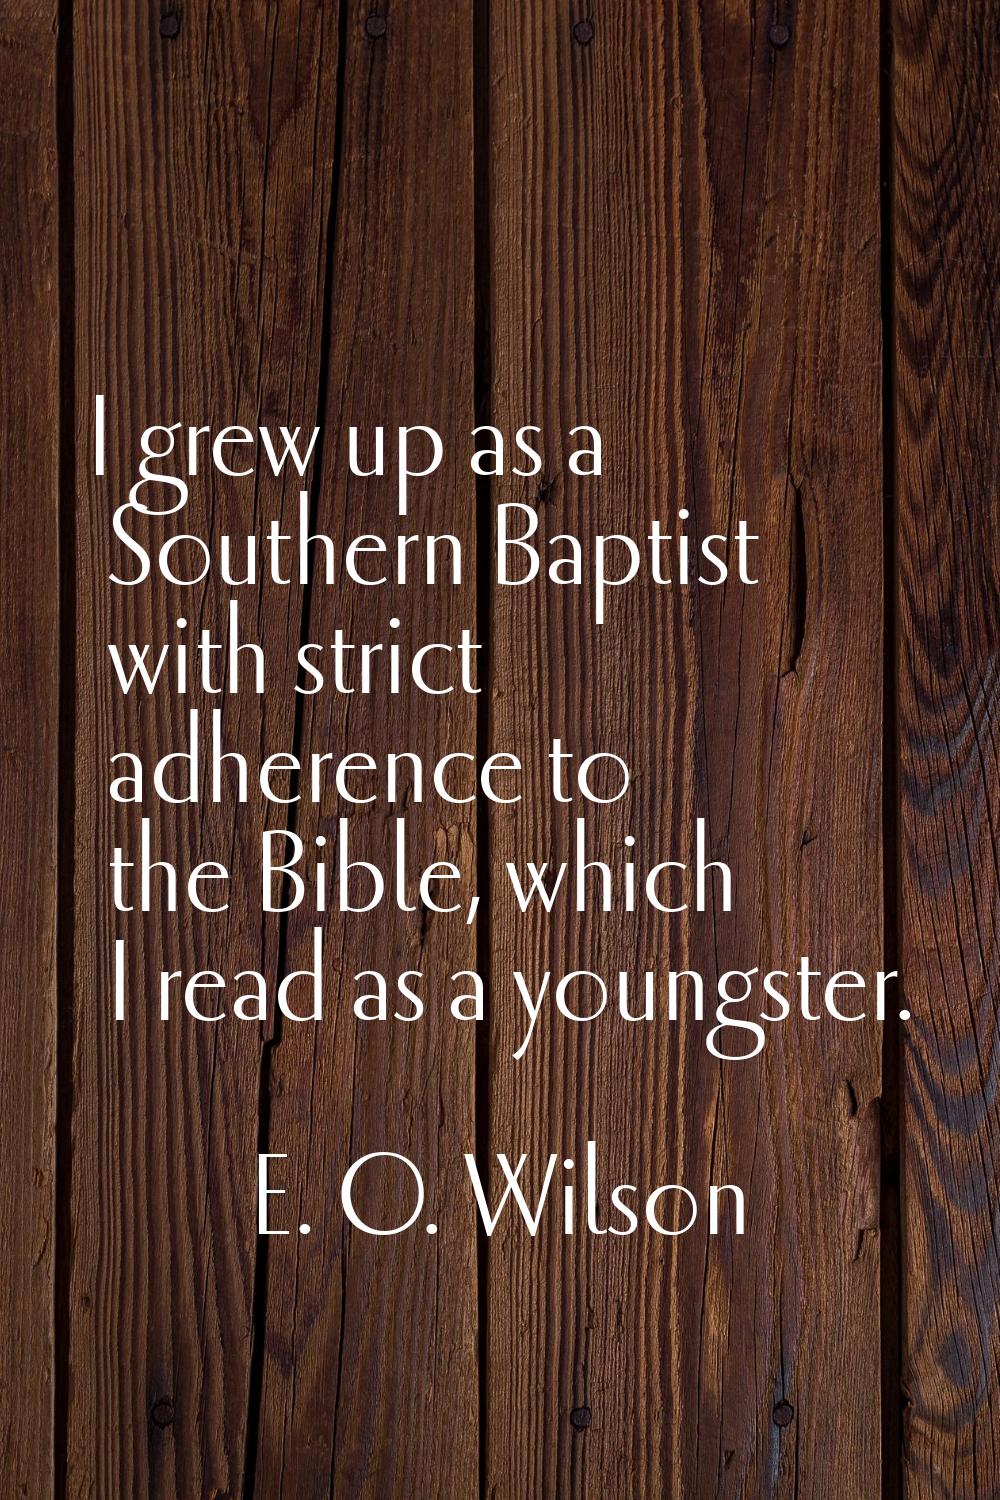 I grew up as a Southern Baptist with strict adherence to the Bible, which I read as a youngster.